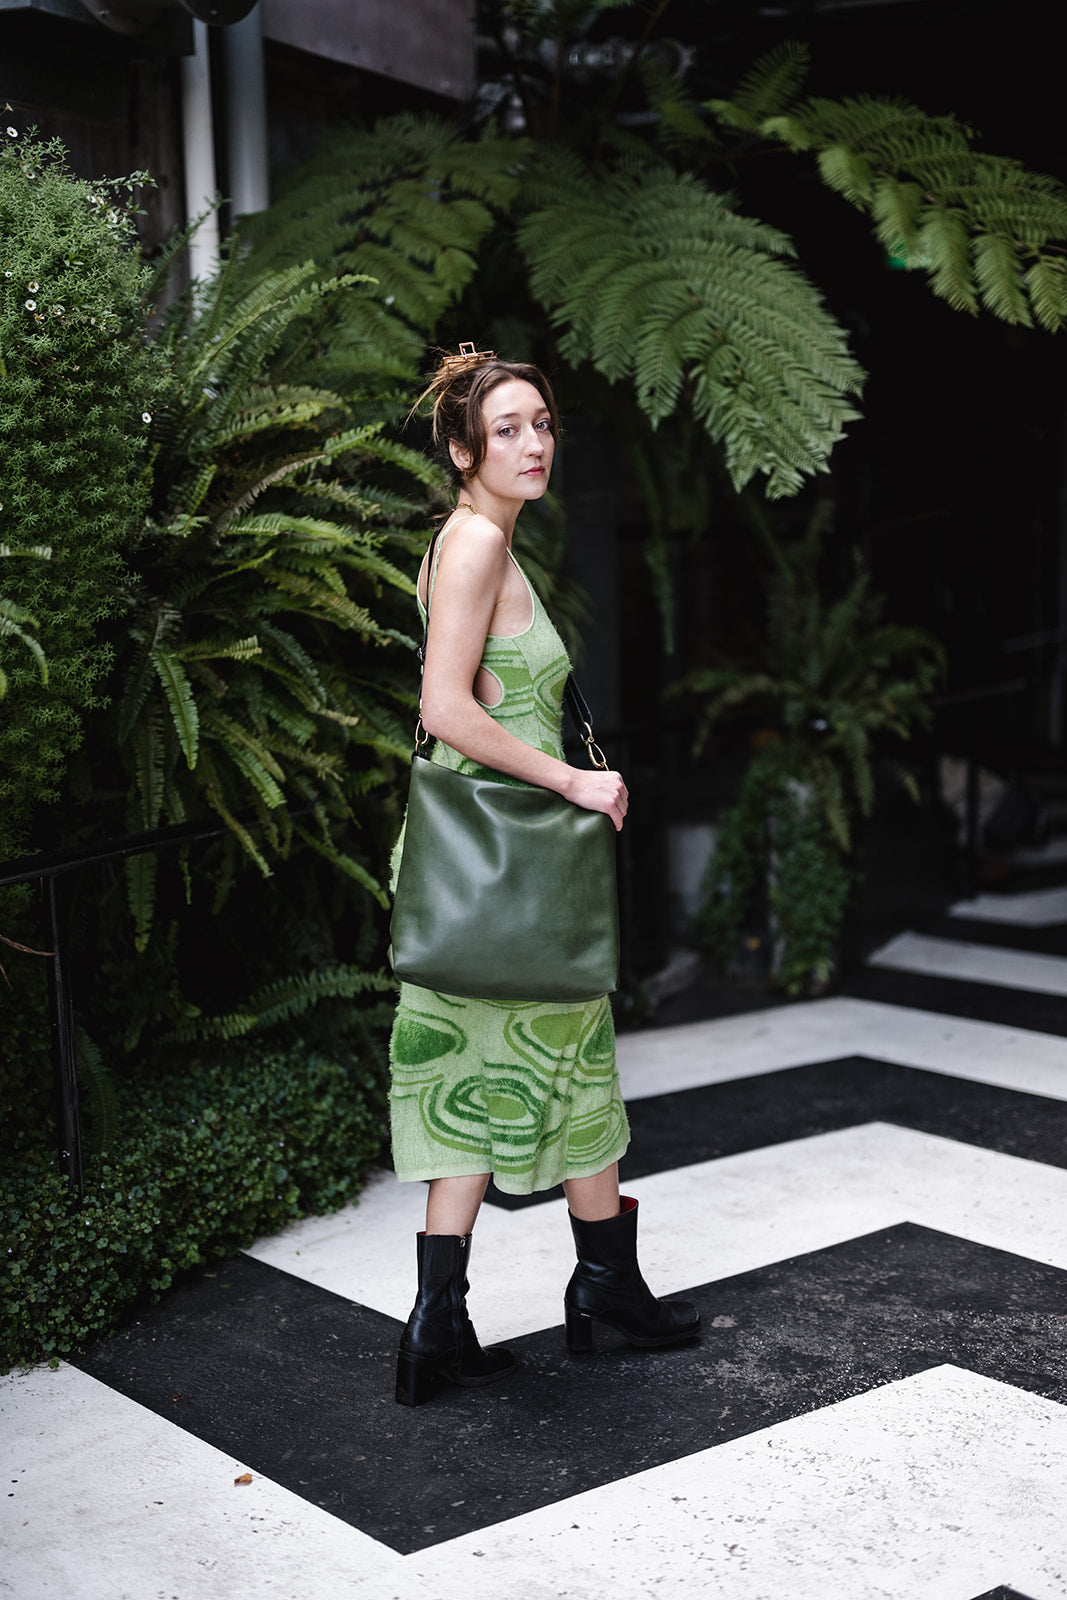 Woman in sleeveless green dress standing amongst ferns and modelling green leather bag. The bag is the Ella Jackson Leather Carryall in Moss Green